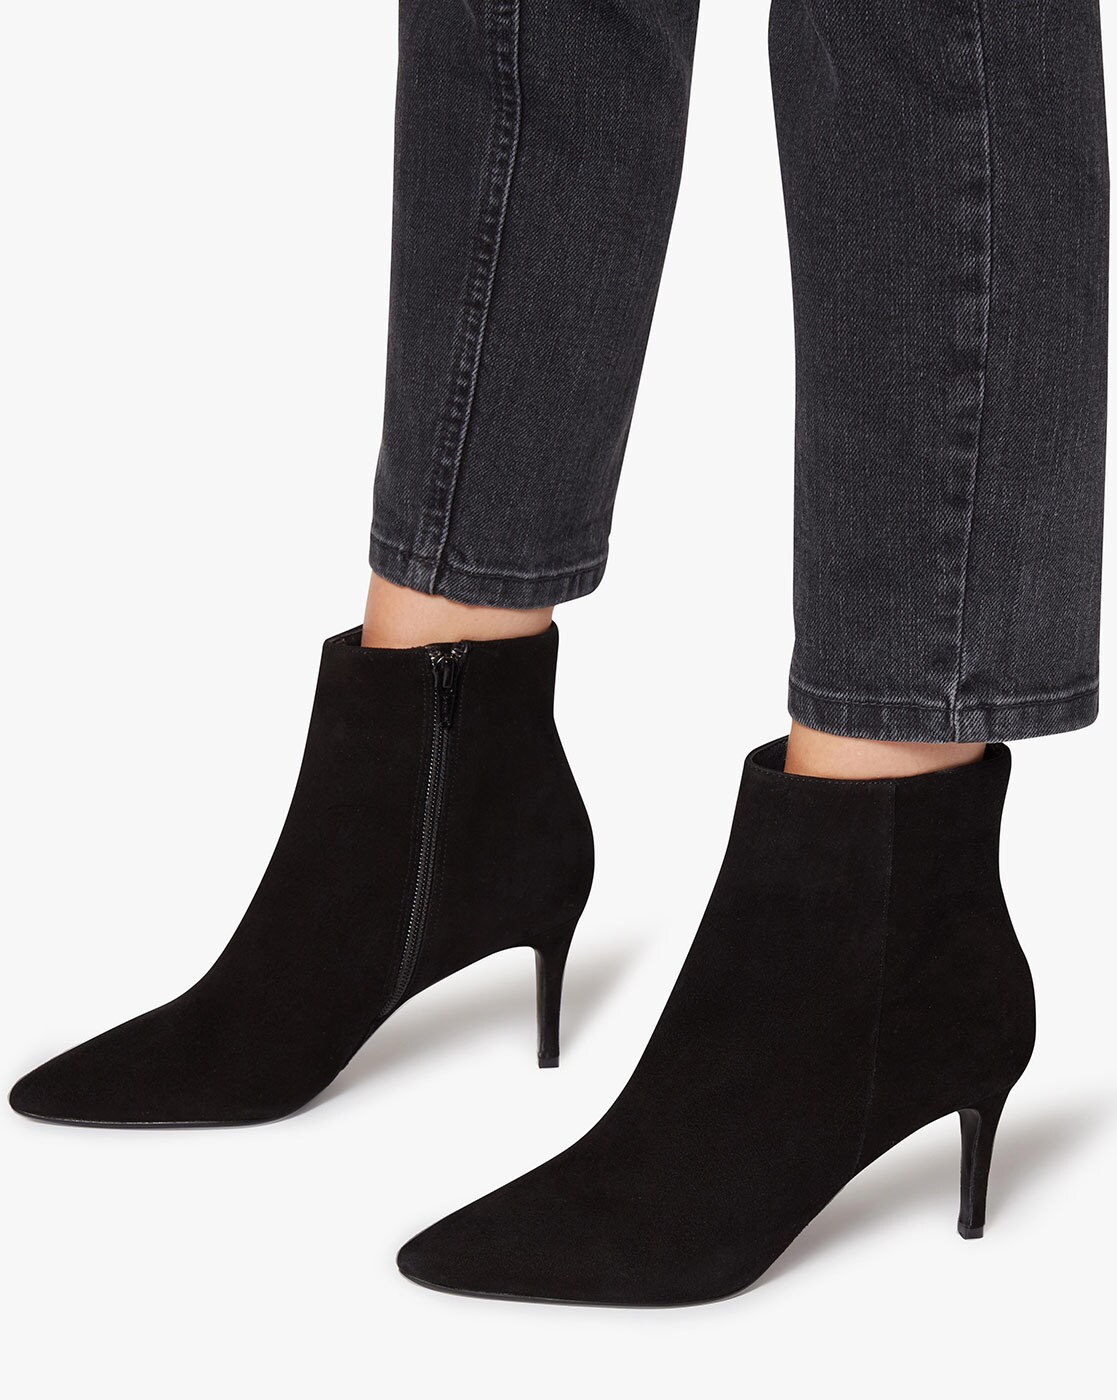 Boots for Women by Dune London 